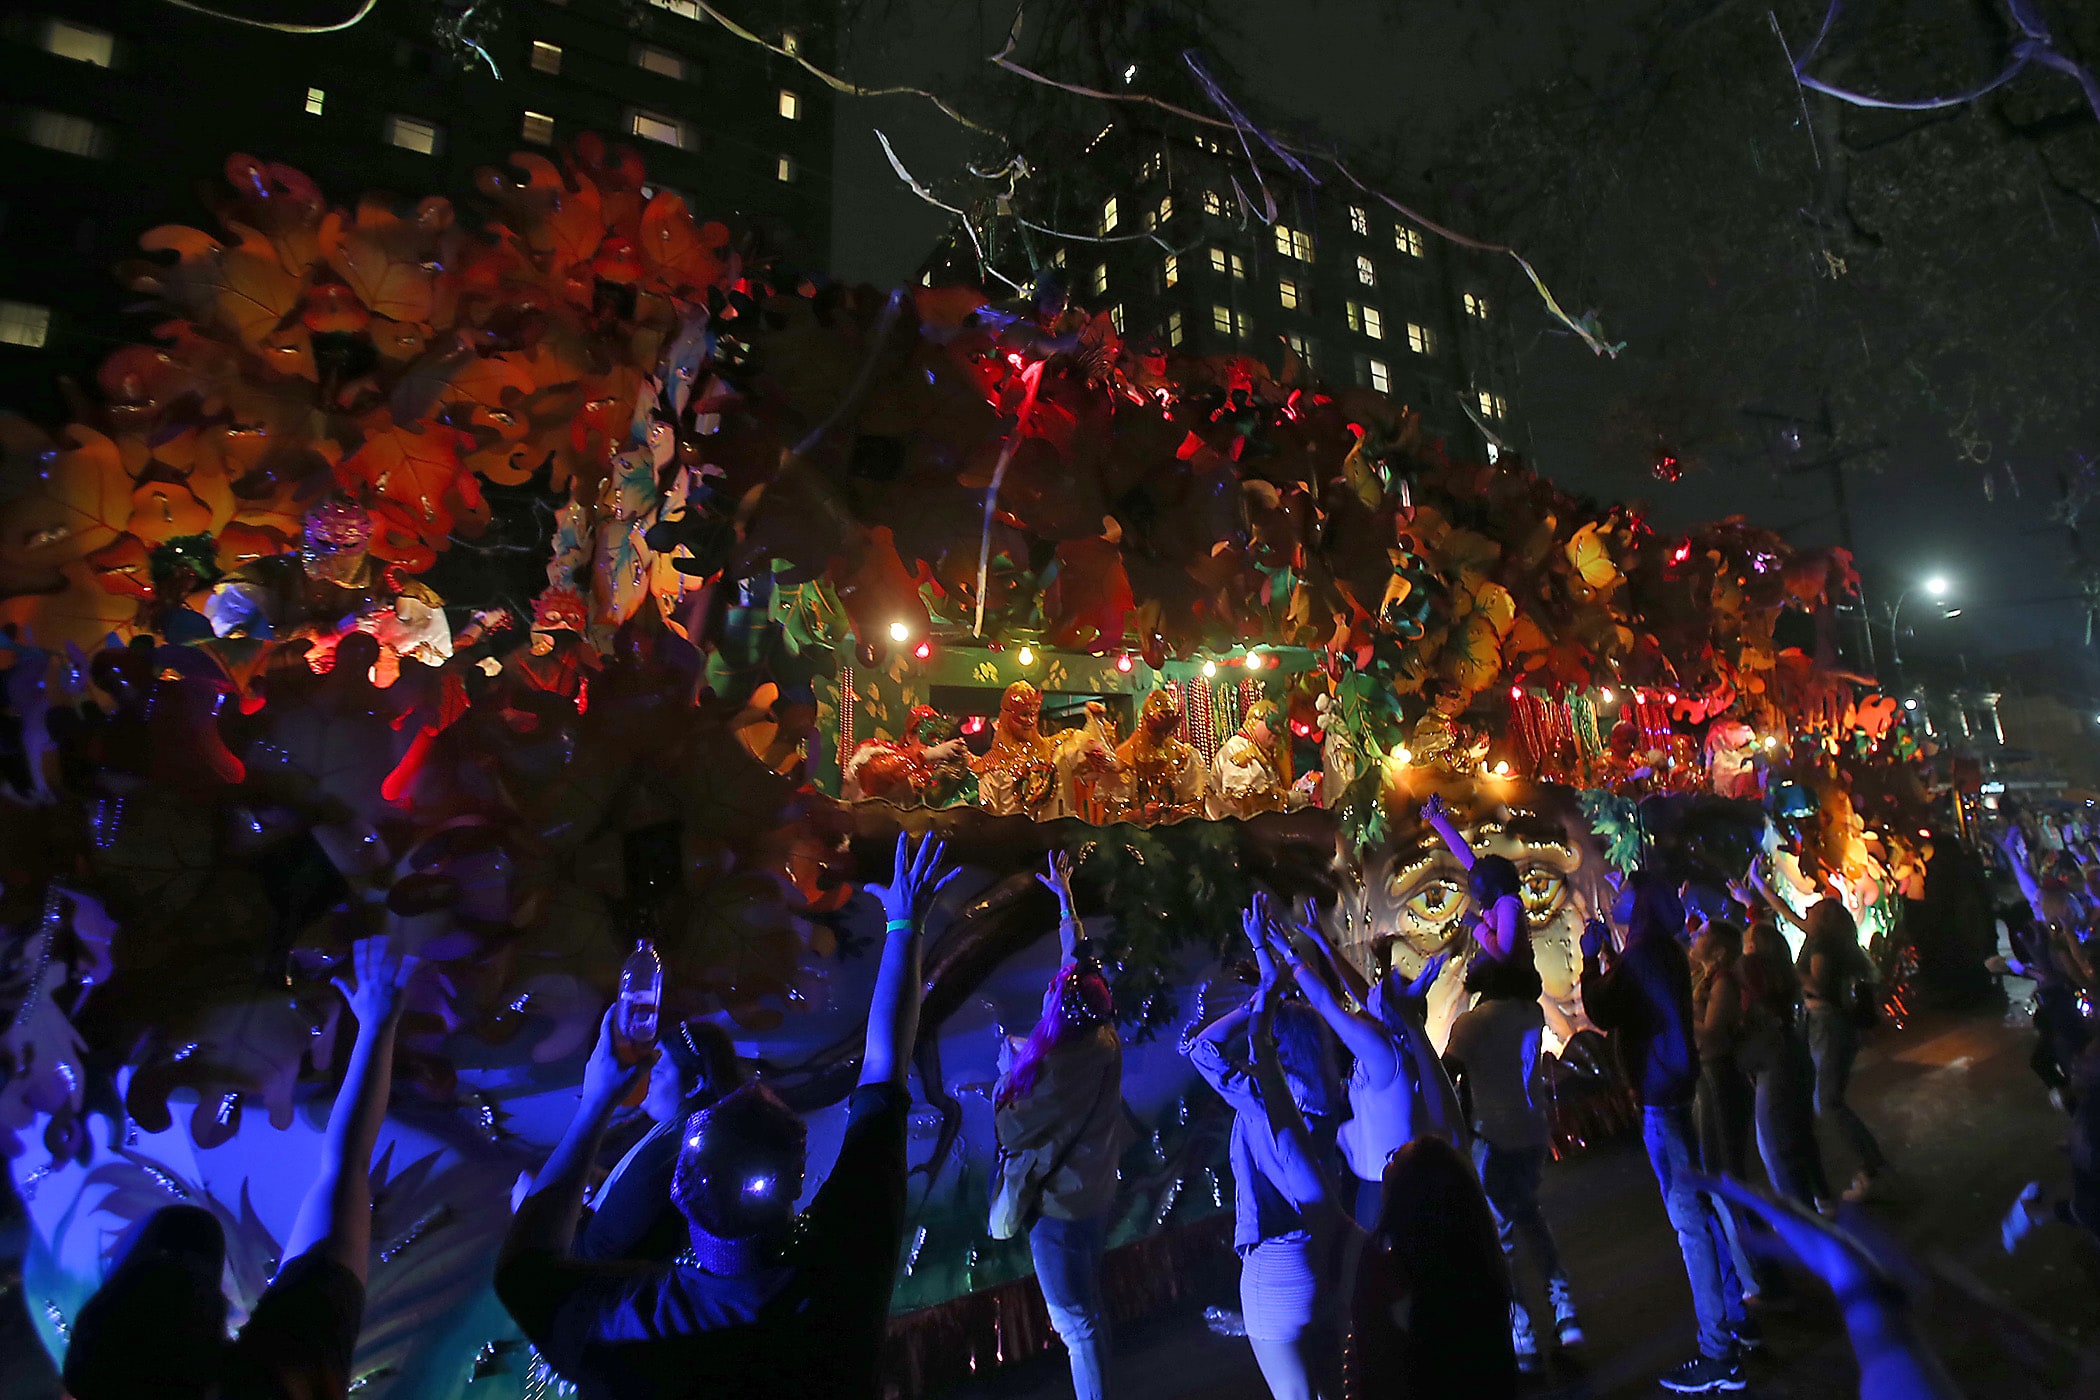 The 1,500 members of the Krewe of Orpheus roll down the Uptown route on 38 floats with their parade entitled “Beastly Kingdoms of Orpheus” on Monday, February 24, 2020. (Photo by Michael DeMocker)